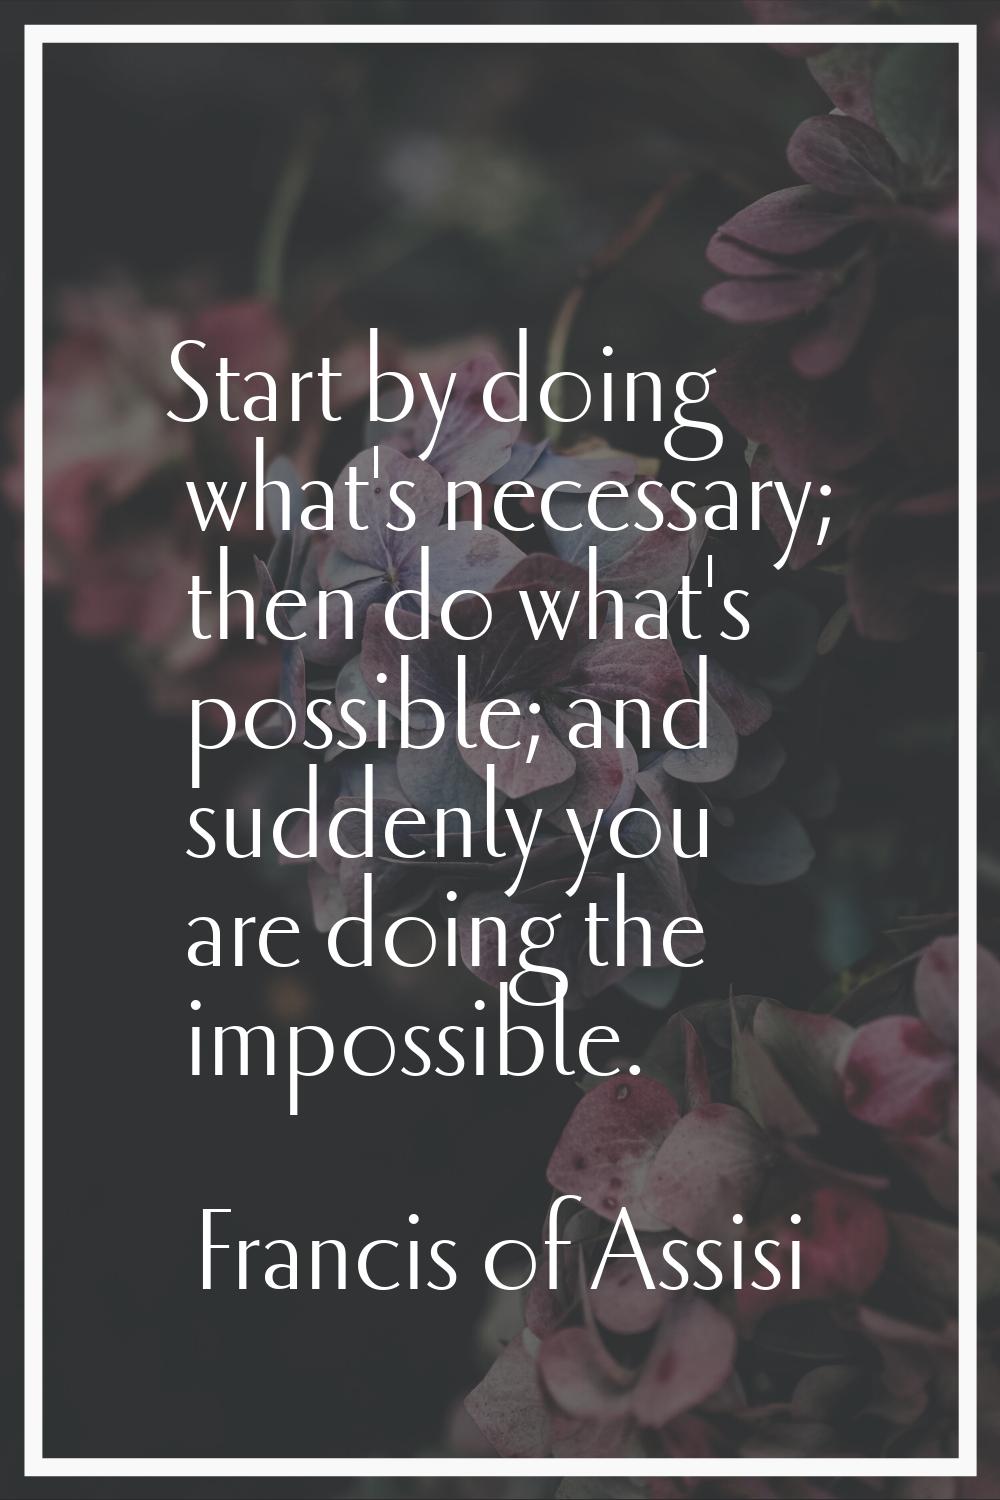 Start by doing what's necessary; then do what's possible; and suddenly you are doing the impossible